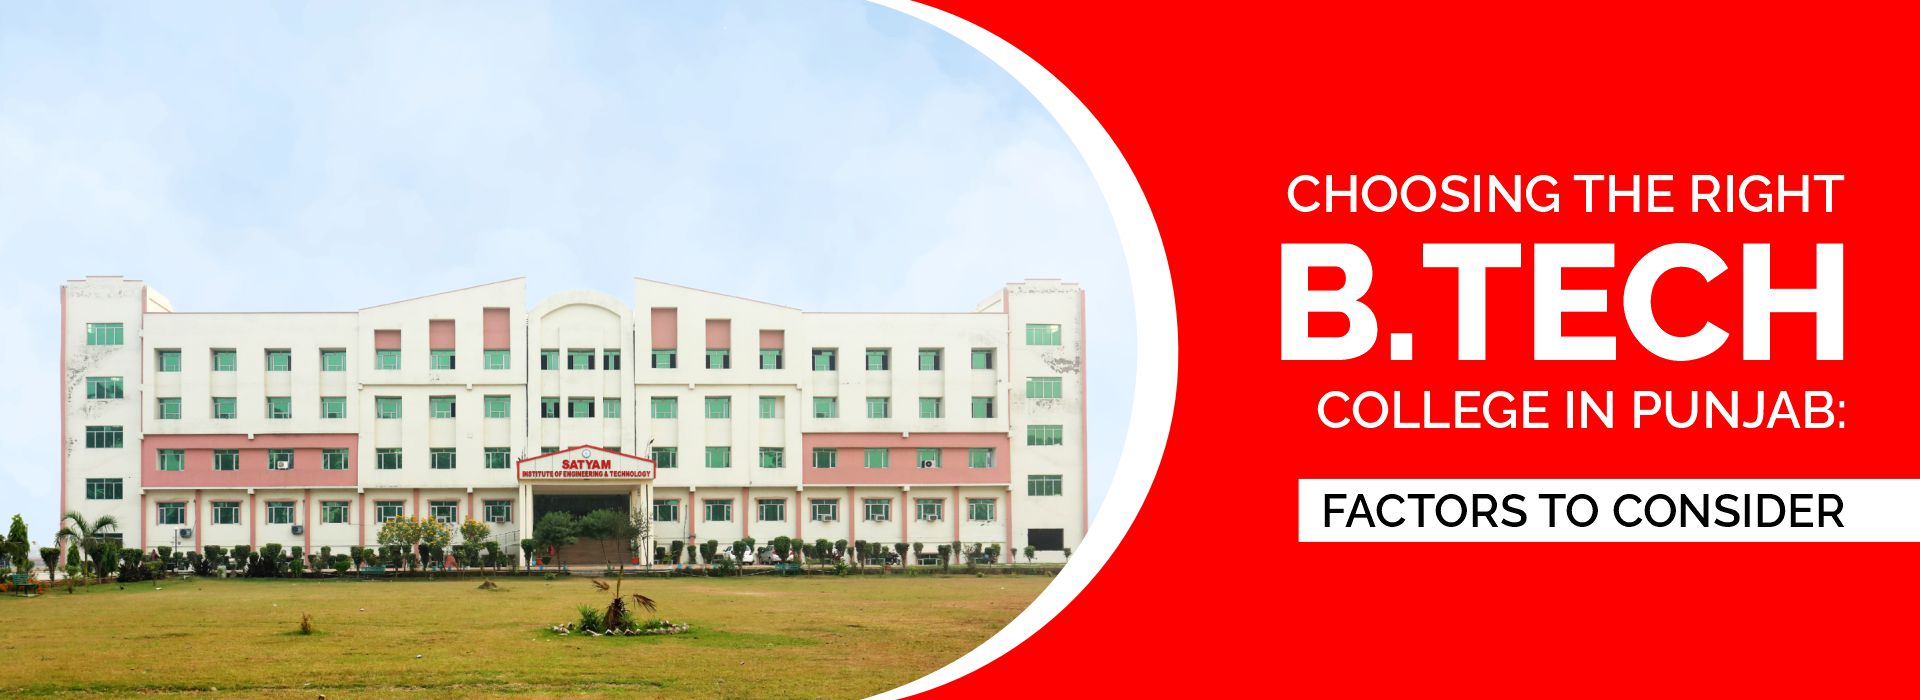 Choosing the Right BTech College in Punjab: Factors to Consider